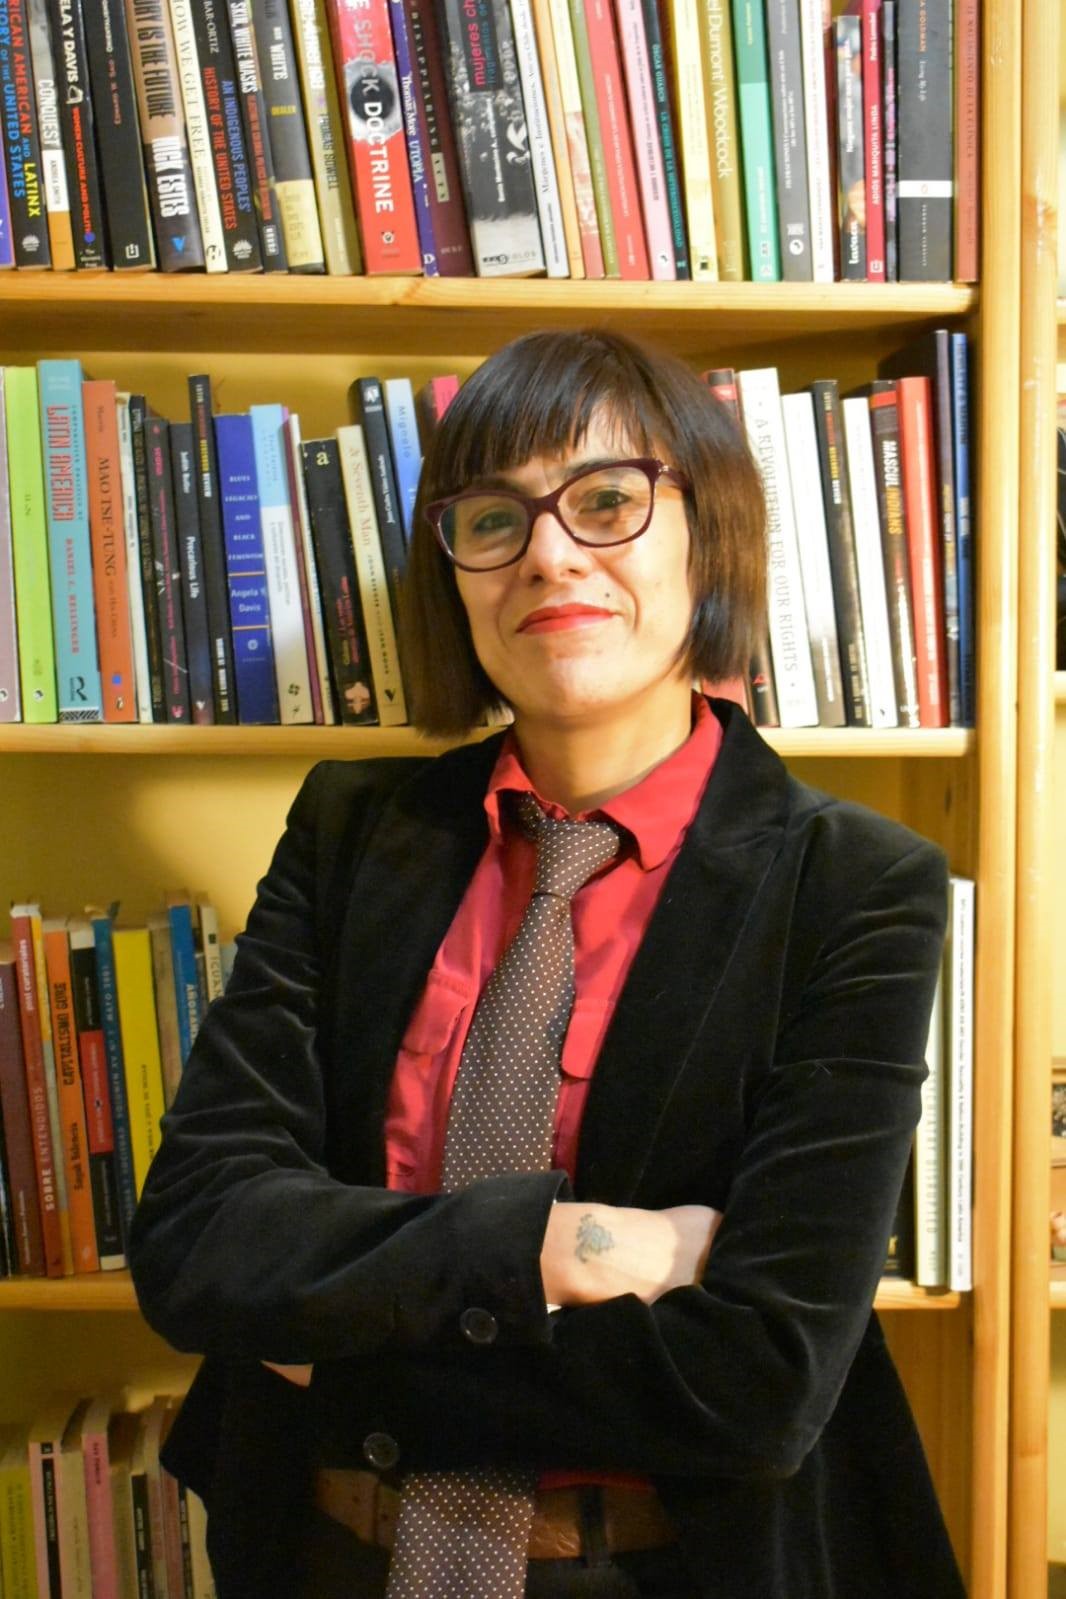 Manuela Valle-Castro standing in front of a bookshelf